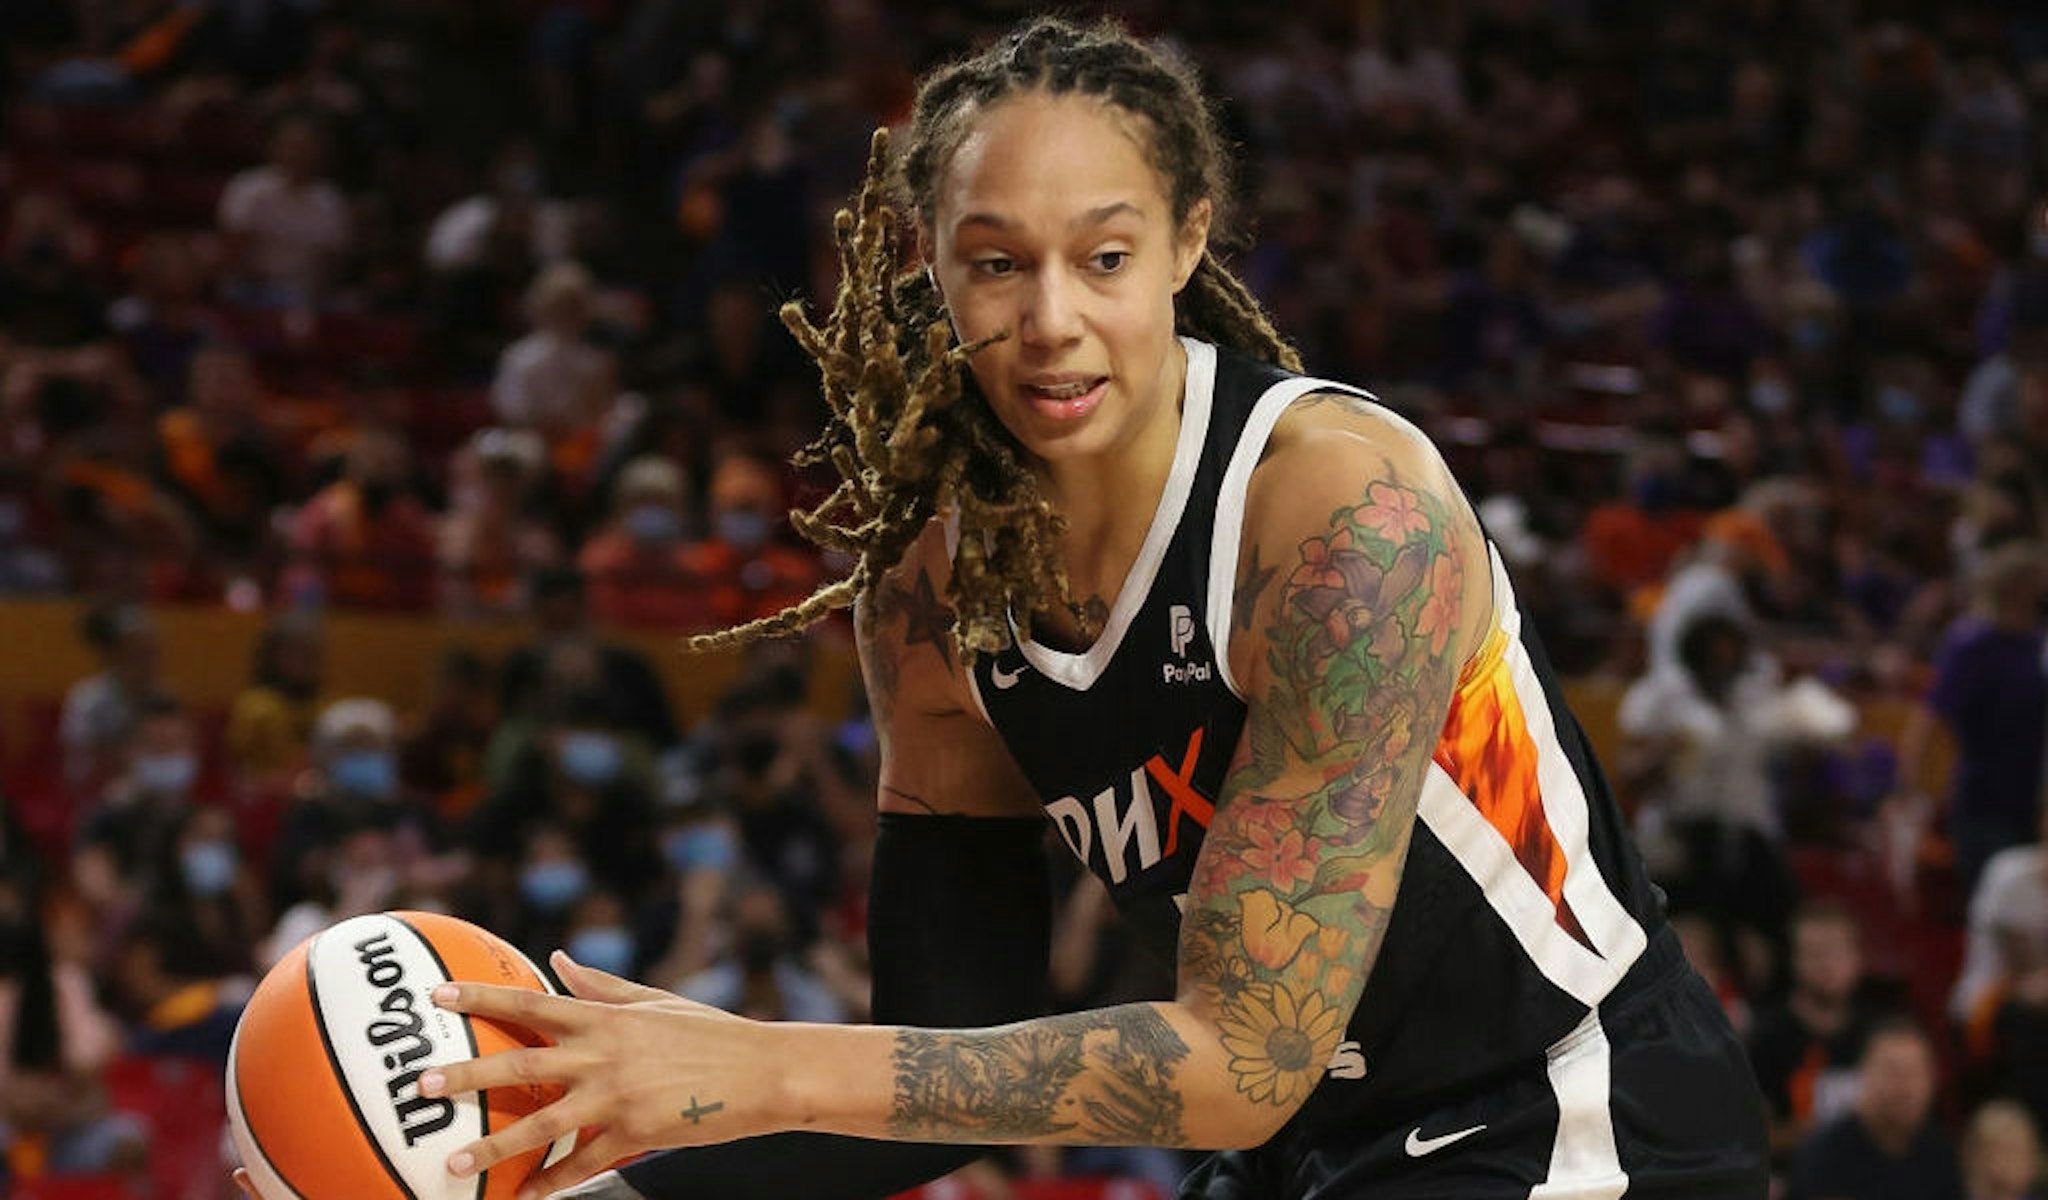 Brittney Griner's wife begged President Biden to help bring her spouse home from Russia, where she is being held on drug charges